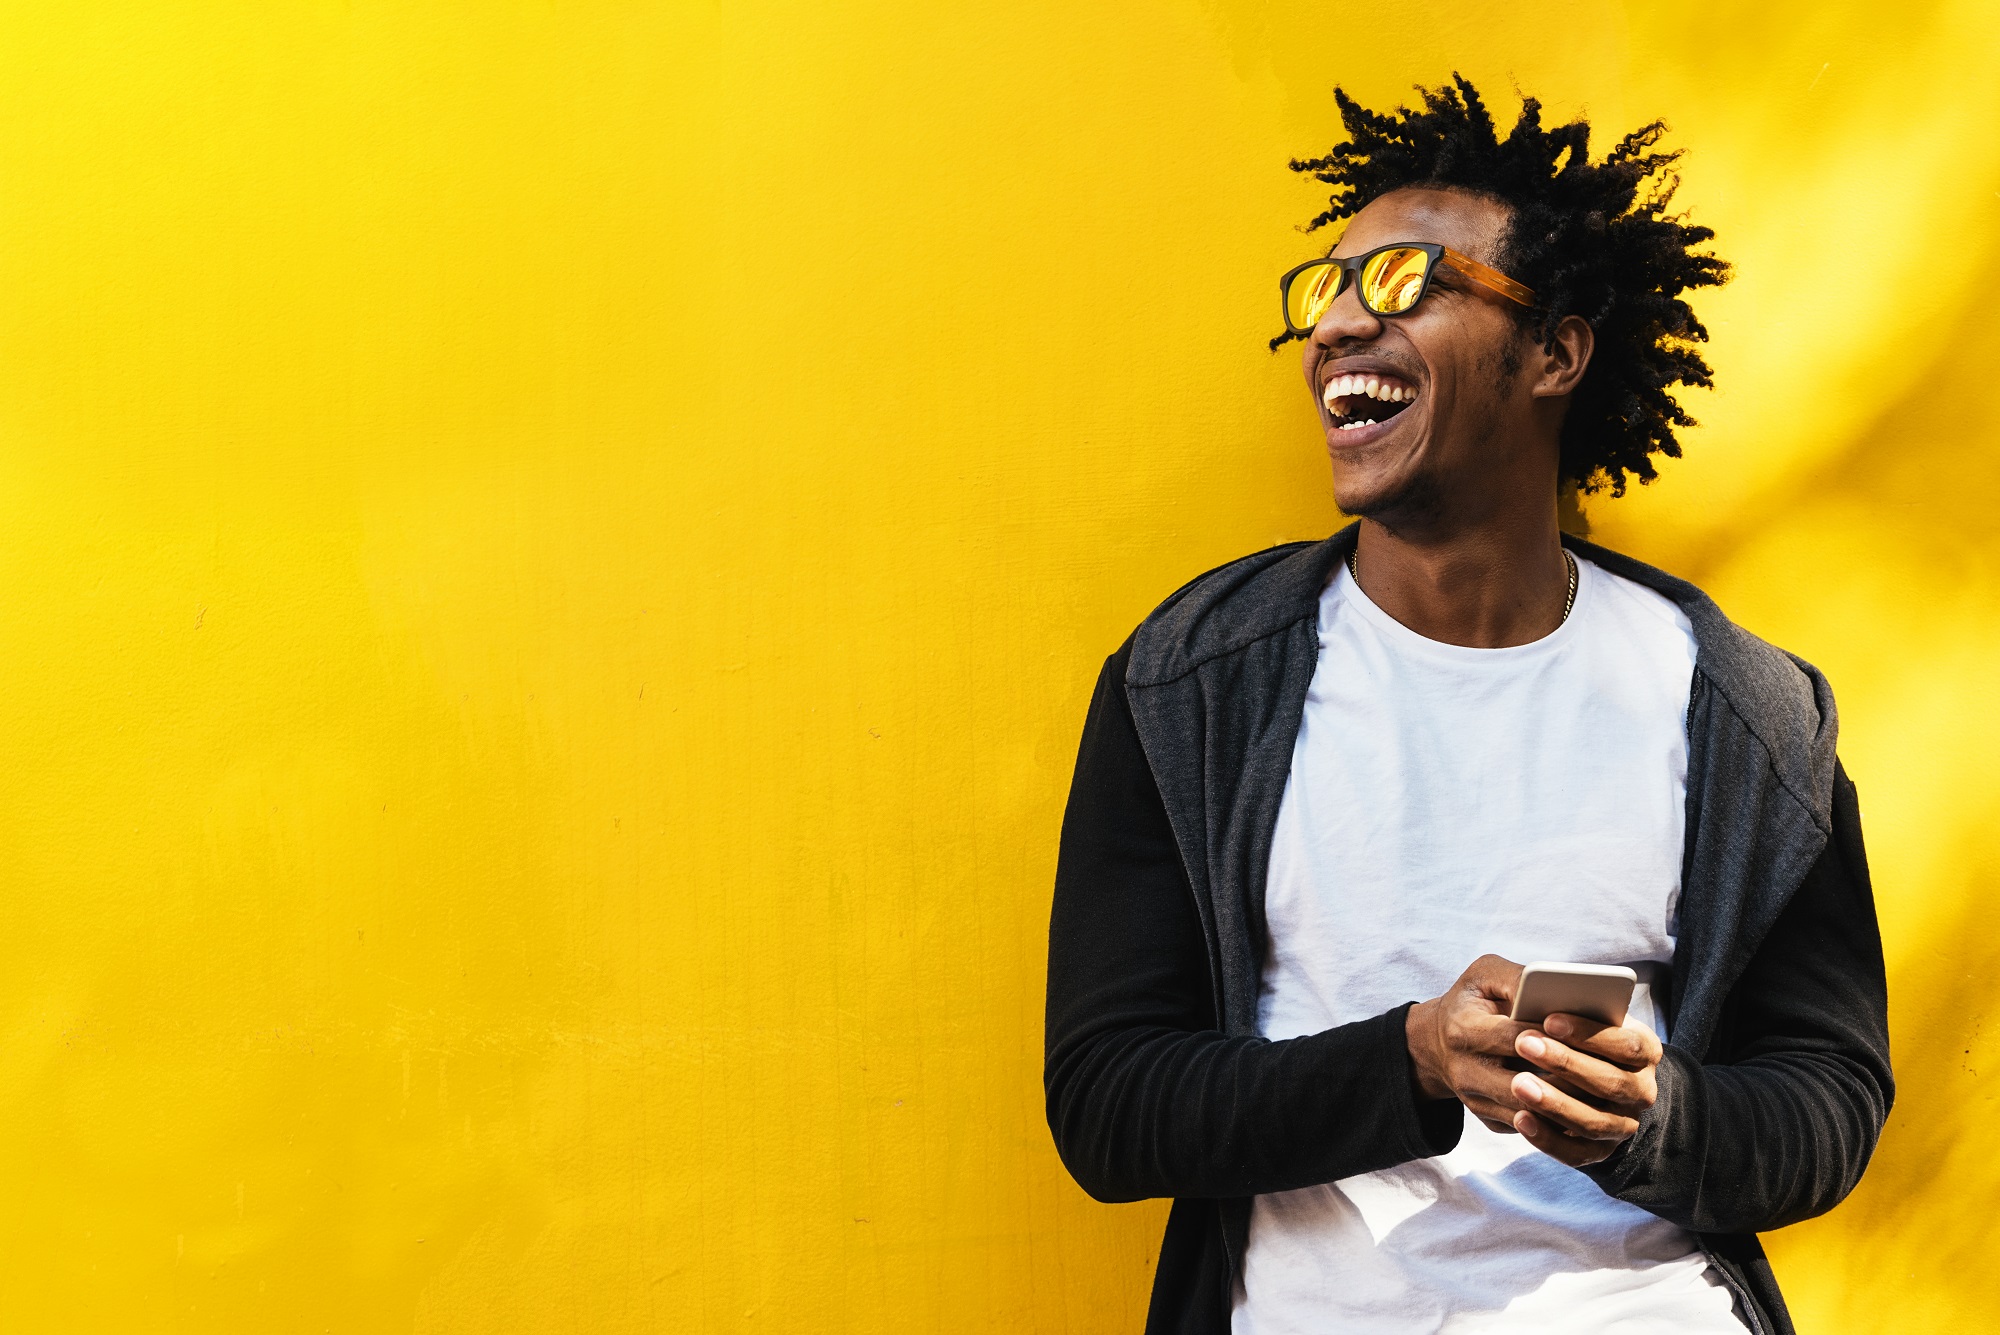 Man laughing while holding phone in front of yellow wall